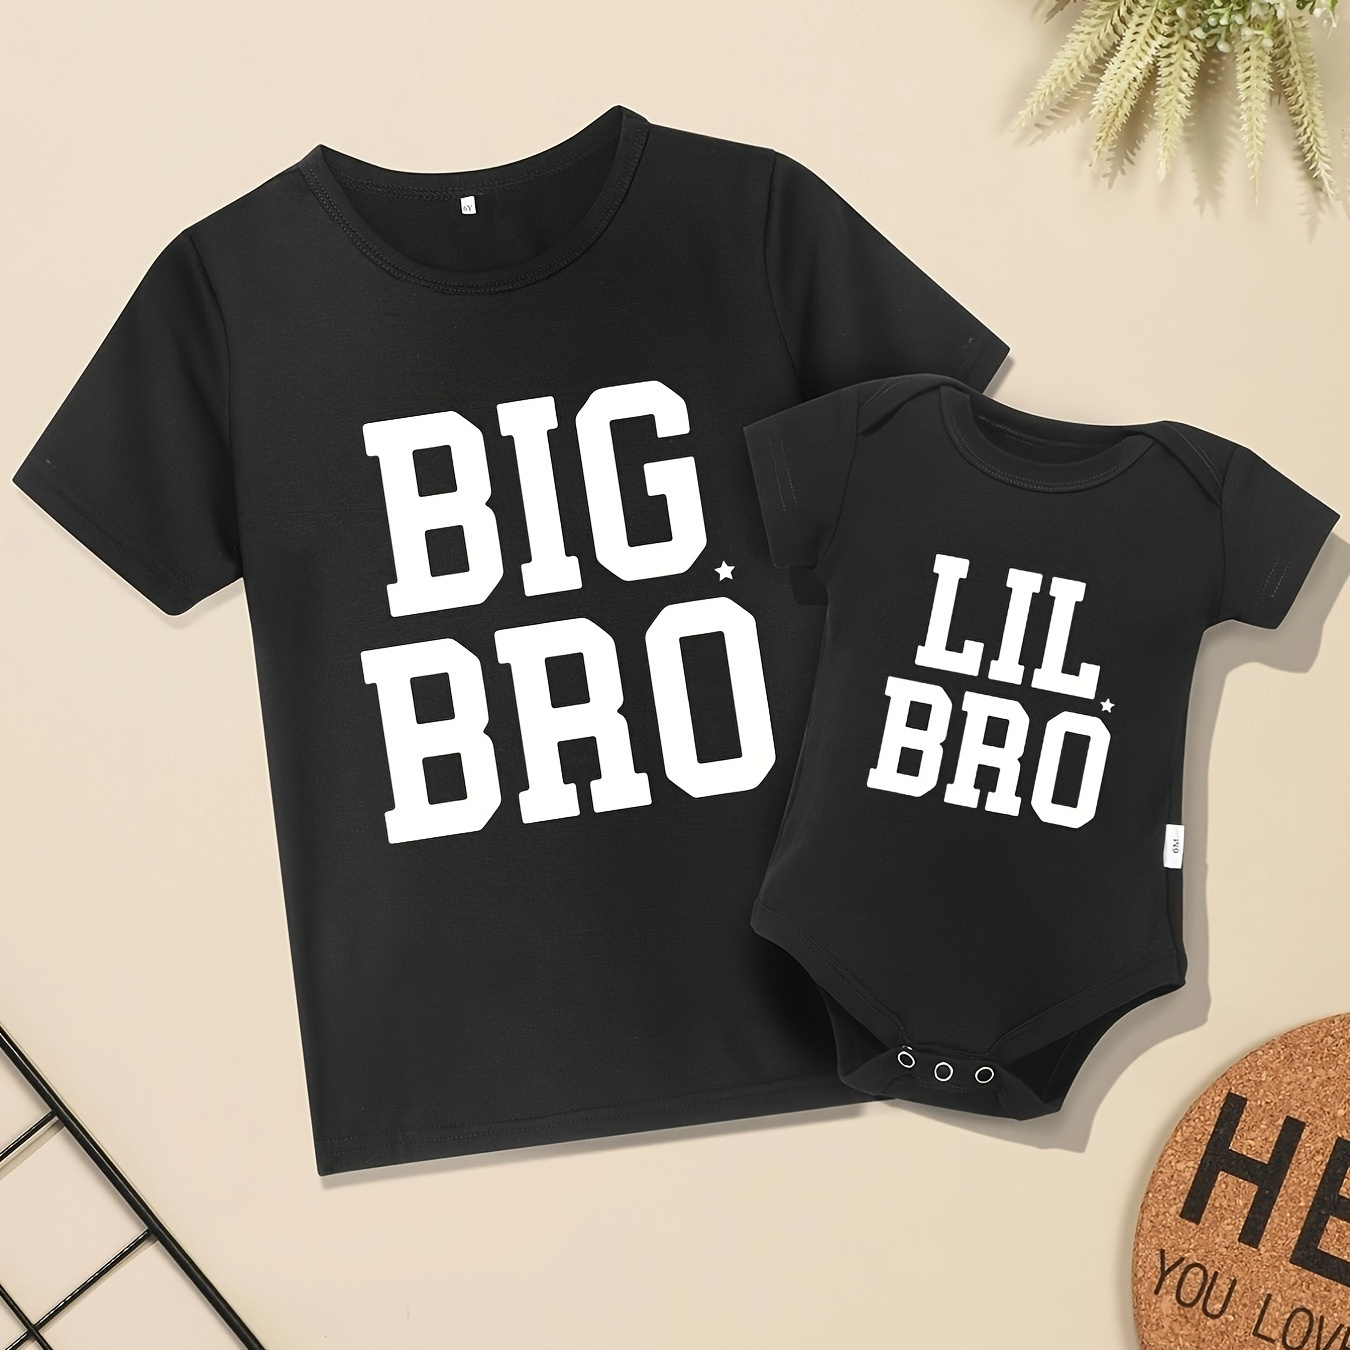 

1pc Brother And Me Matching T-shirt & Onesie- Short Sleeve Tee & Bodysuit Top With Big Bro Lil Bro Print - Perfect For Family Activities, Travel, And Parties (not 2pcs)